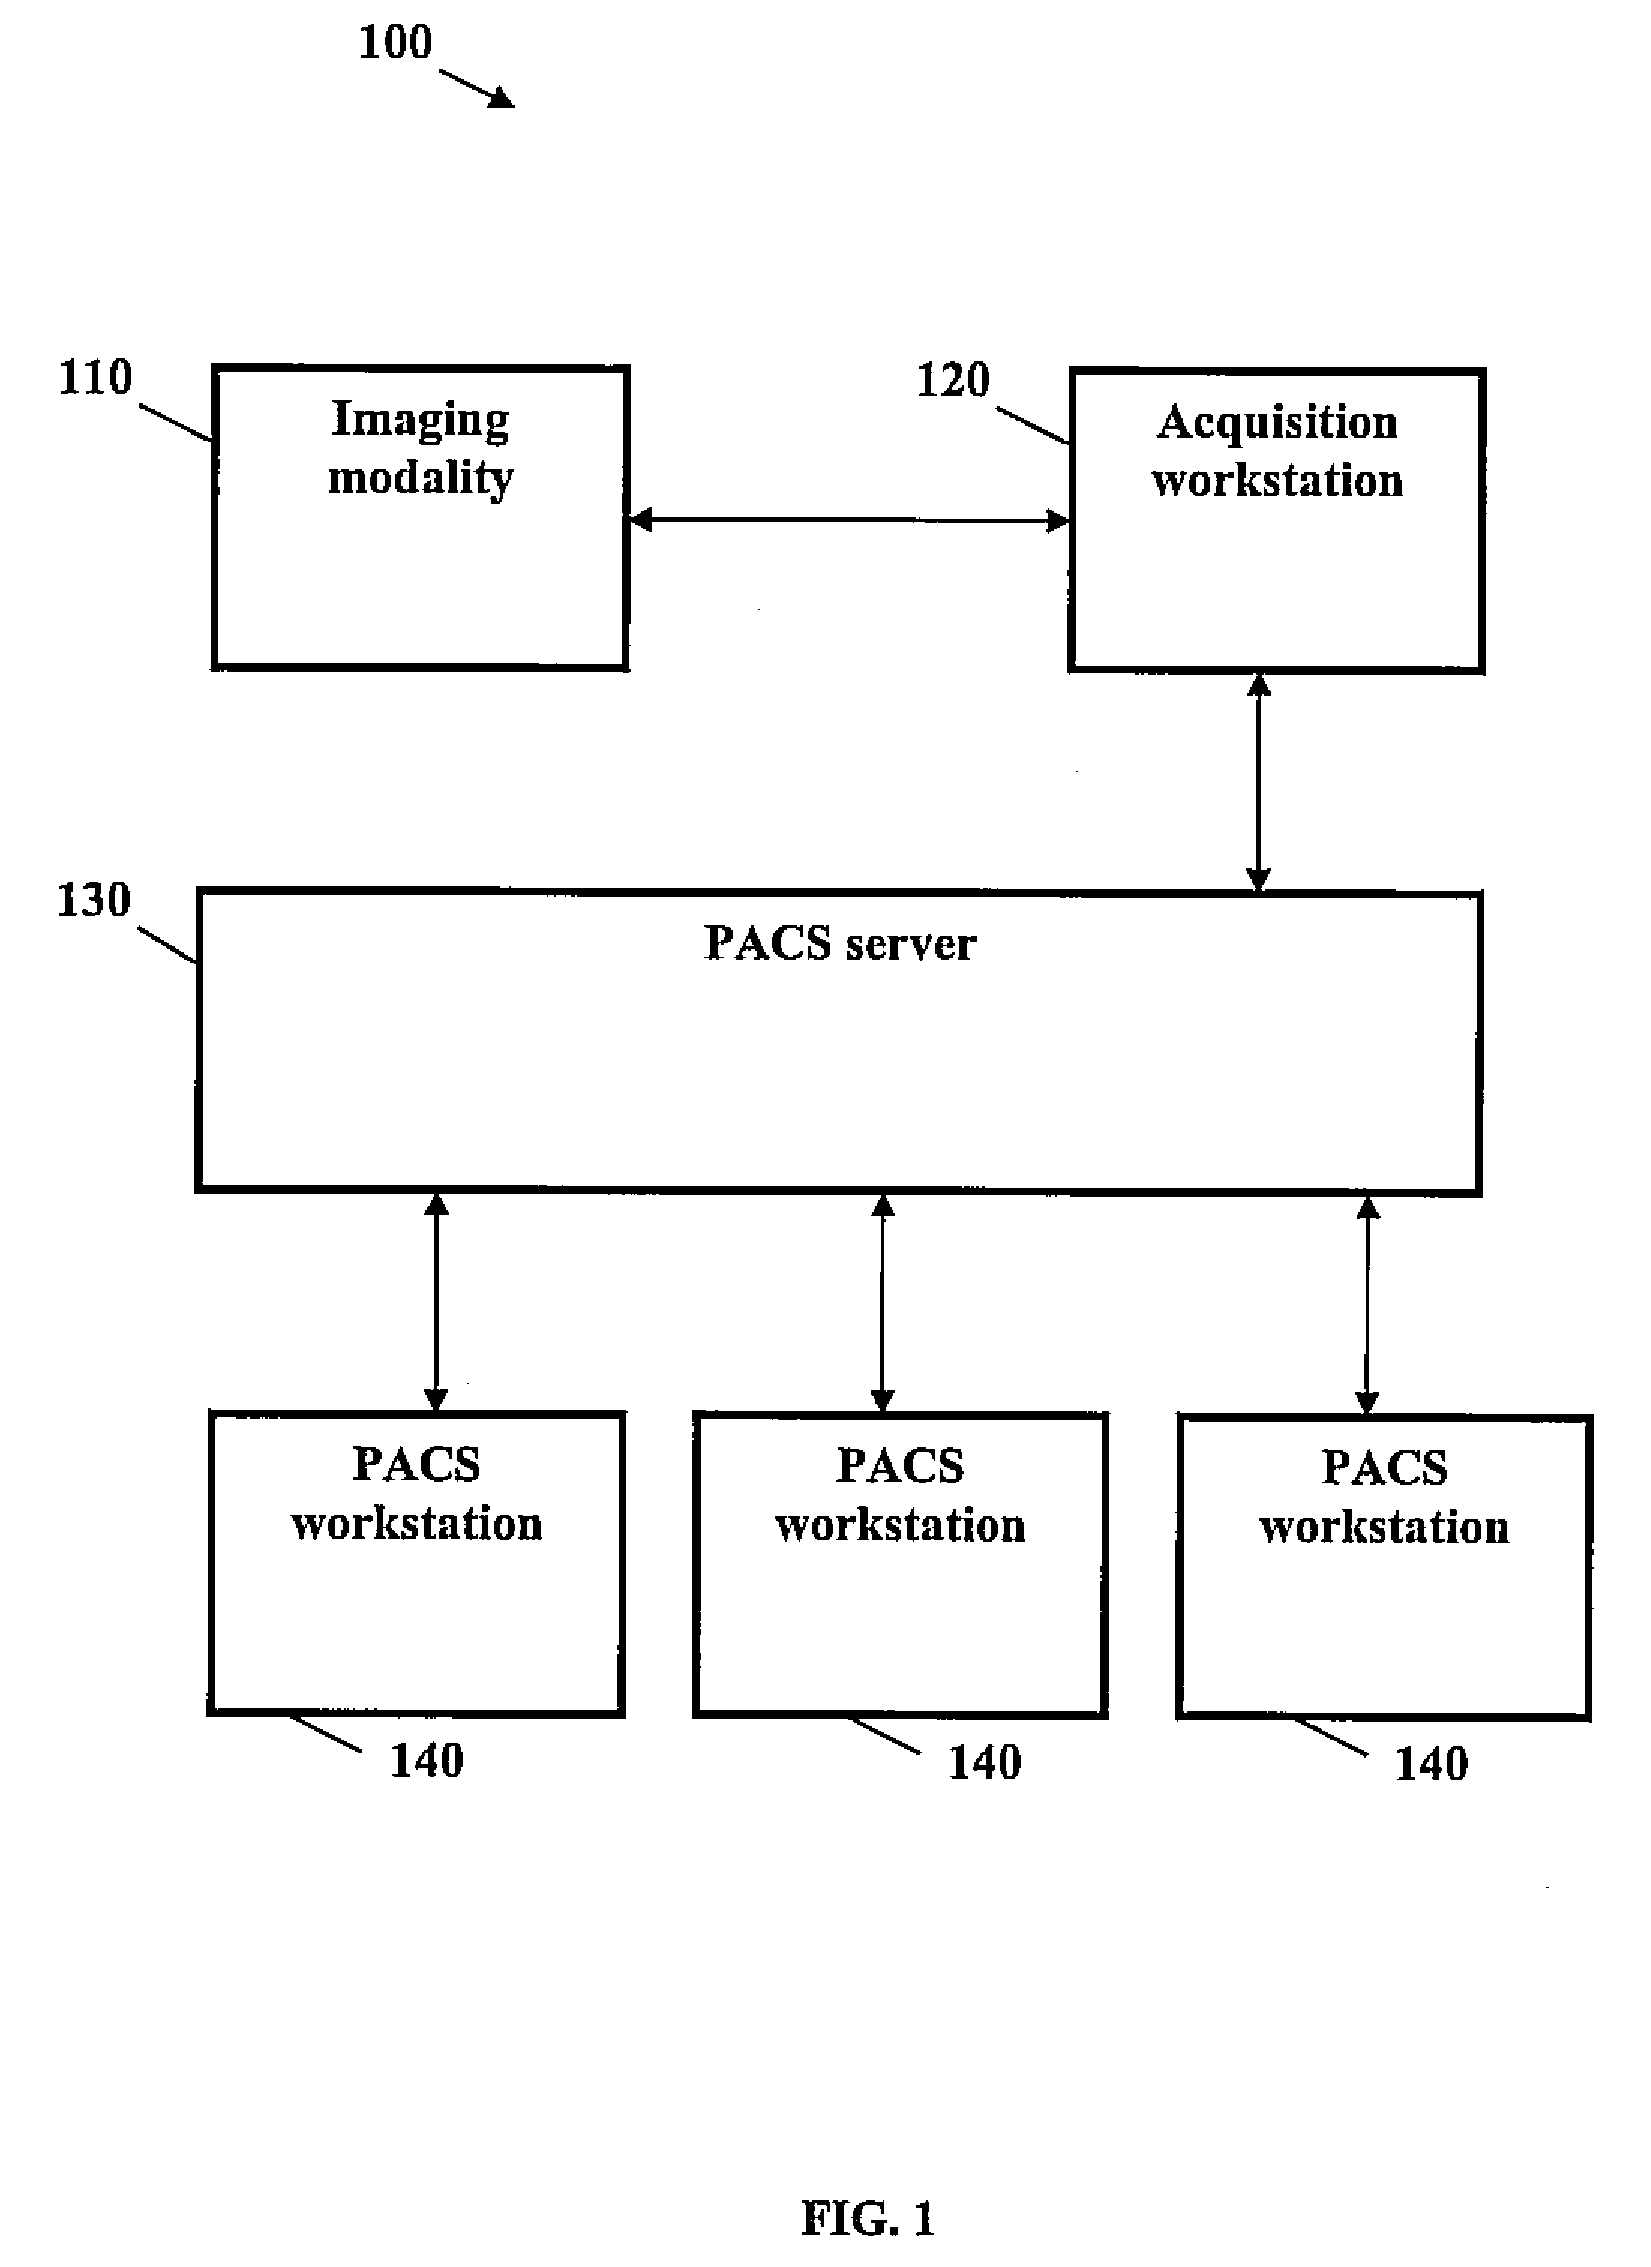 Systems and methods for use of image recognition for hanging protocol determination